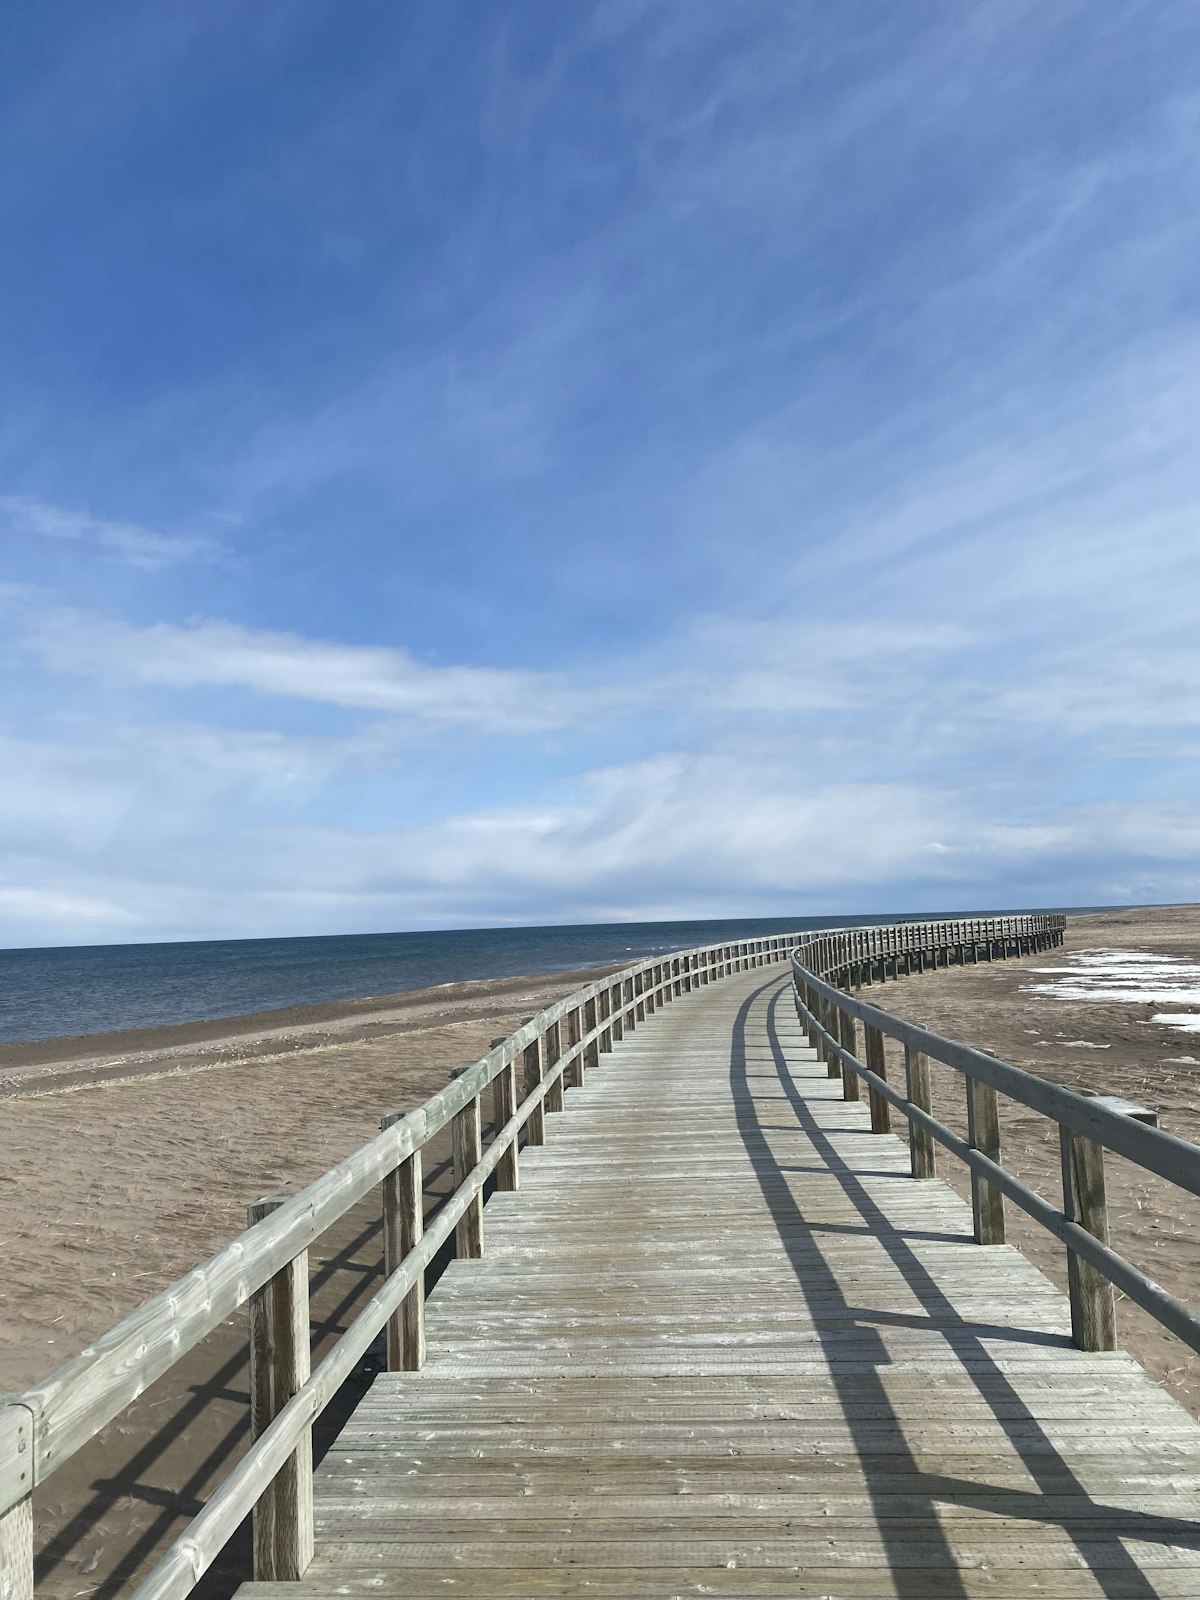 Bouctouche briadwalk, Irving Eco-Centre, NB, Canada; Shutterstock ID 2295488063; purchase_order: 65050; job: ; client: ; other:
2295488063